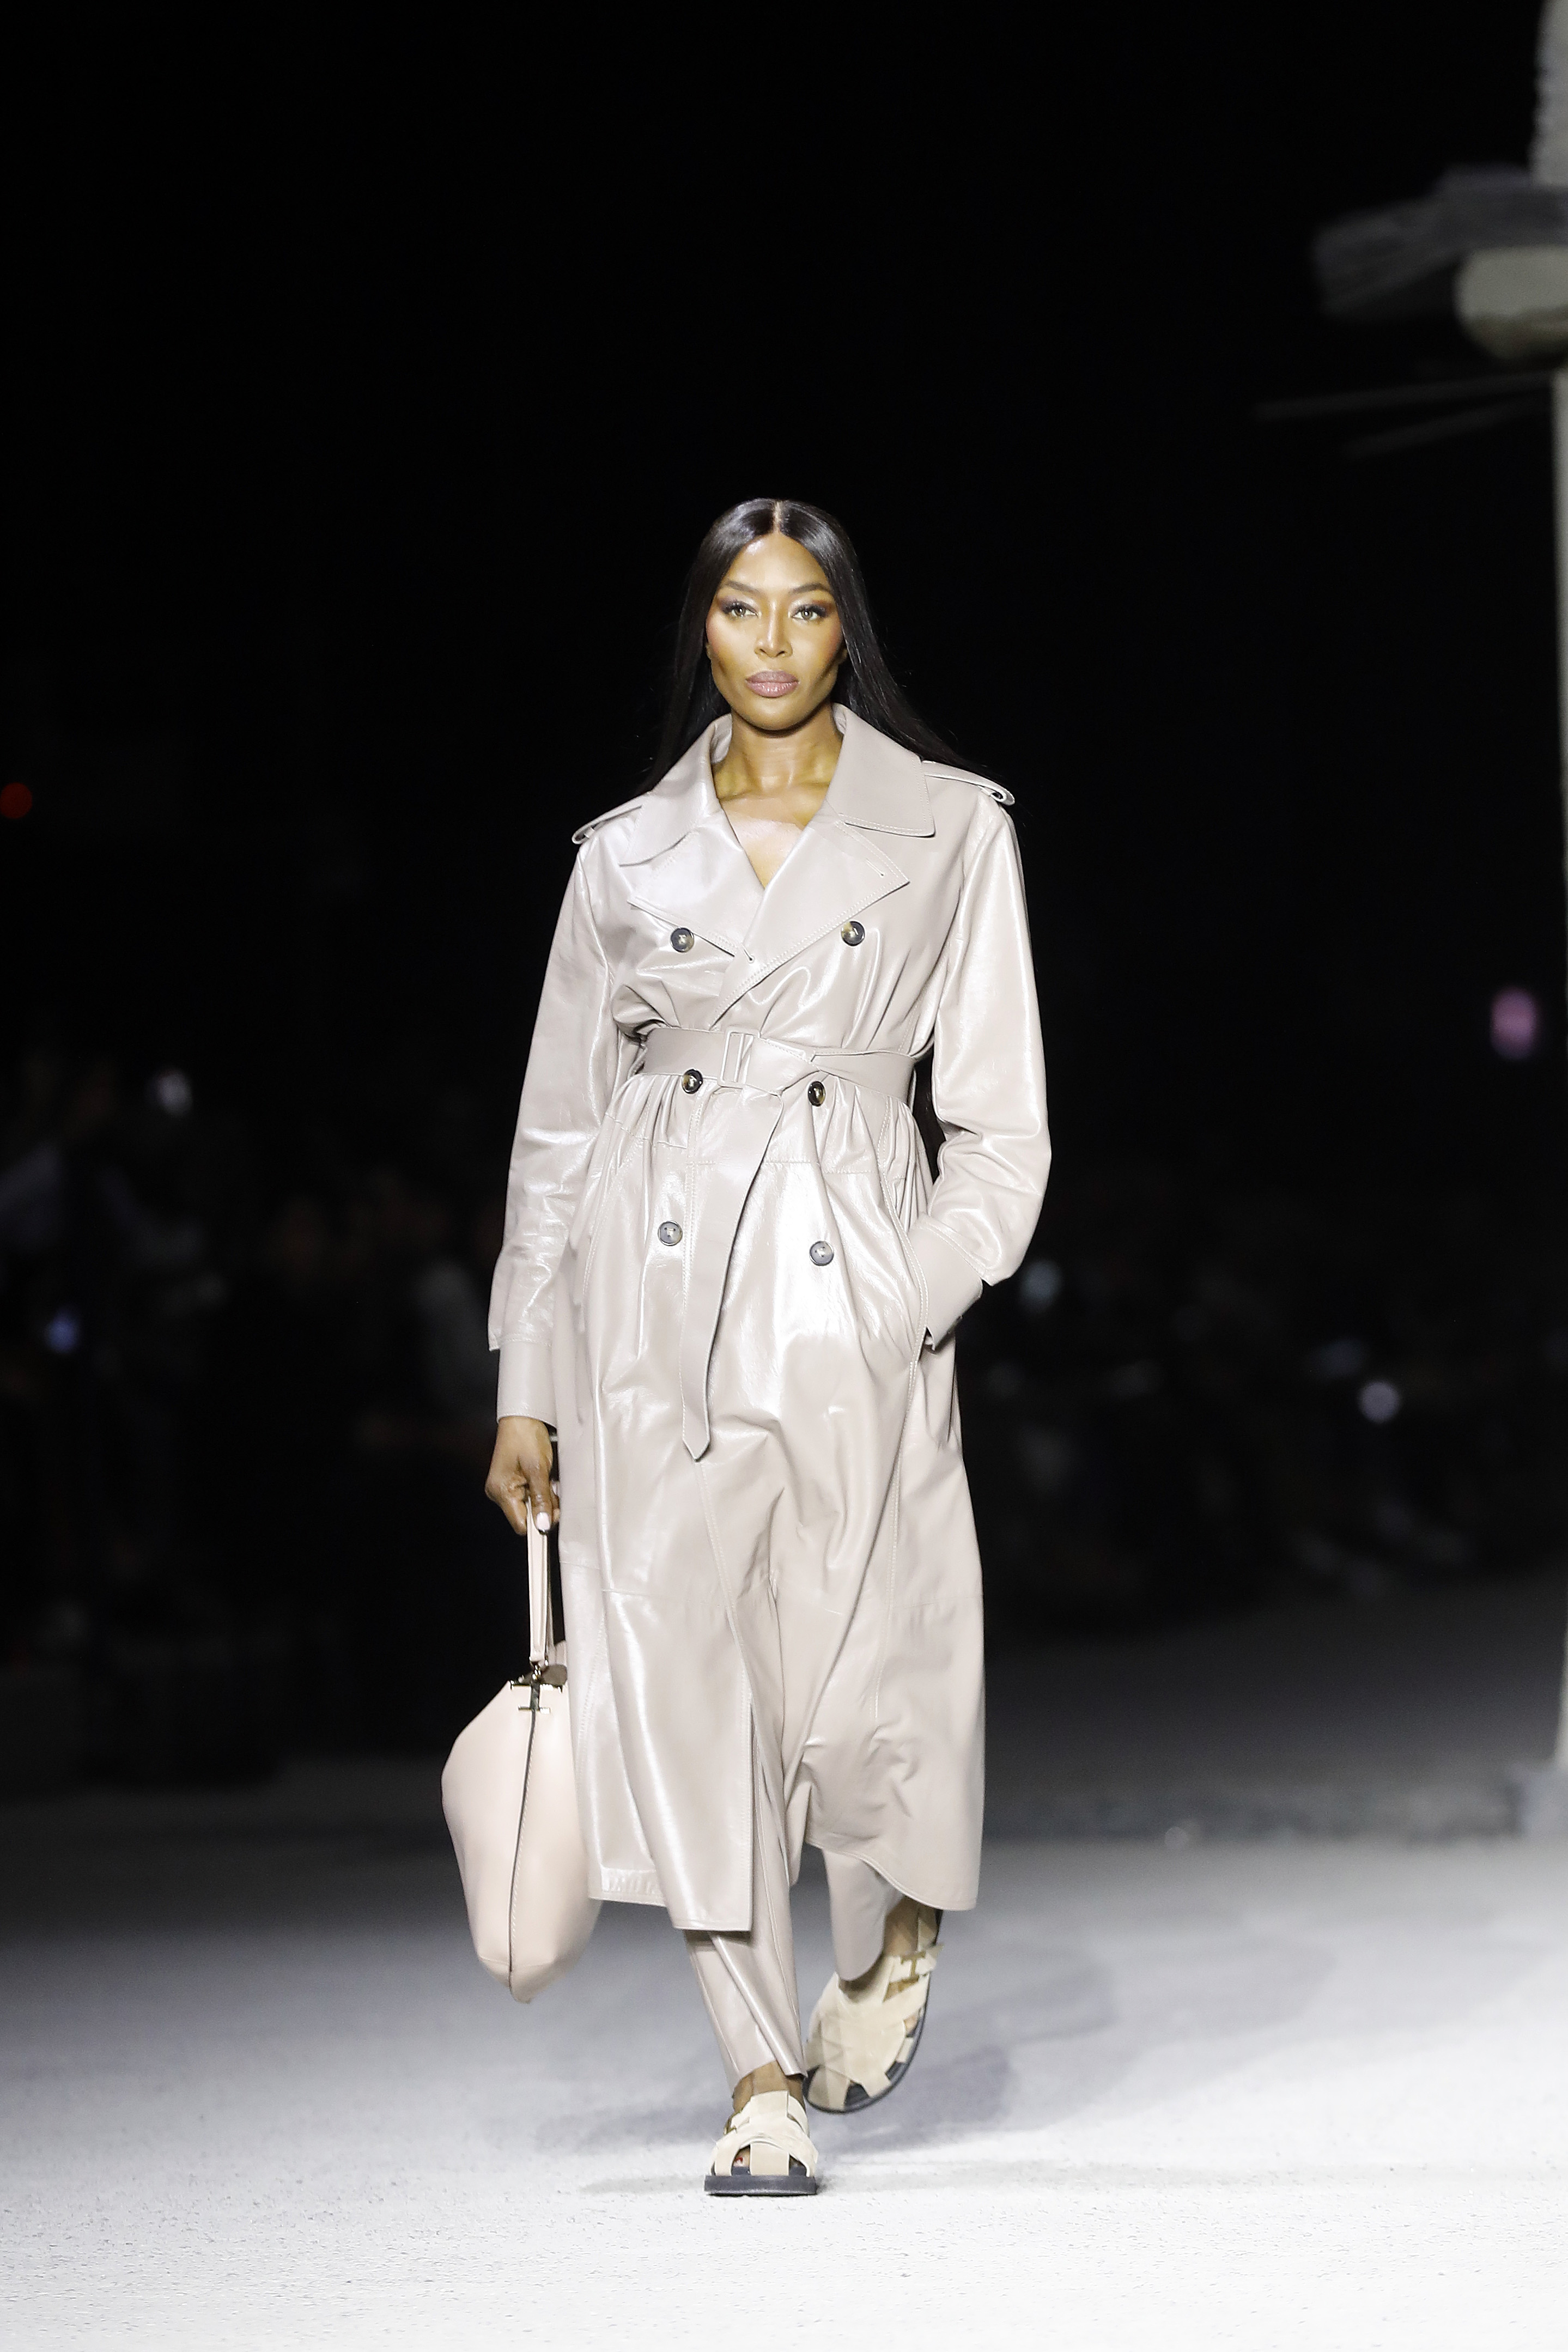 Naomi Campbell walks the runway of the Tod's Fashion Show during the Milan Fashion Week Womenswear Spring/Summer 2023.